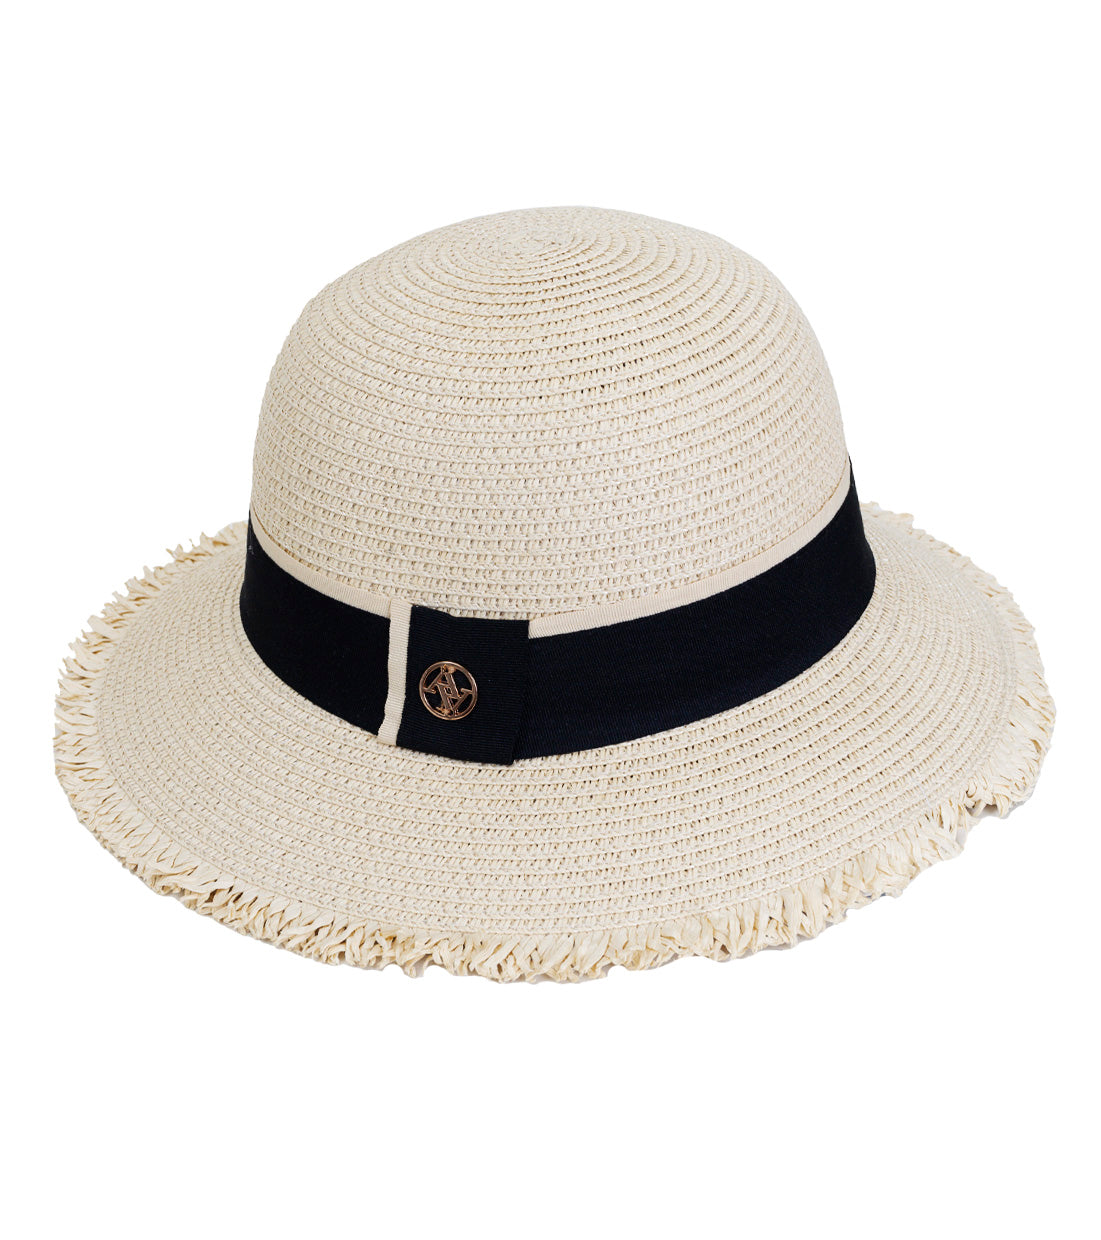 title:Adrienne Vittadini Straw Hat 329S;color:NATURAL